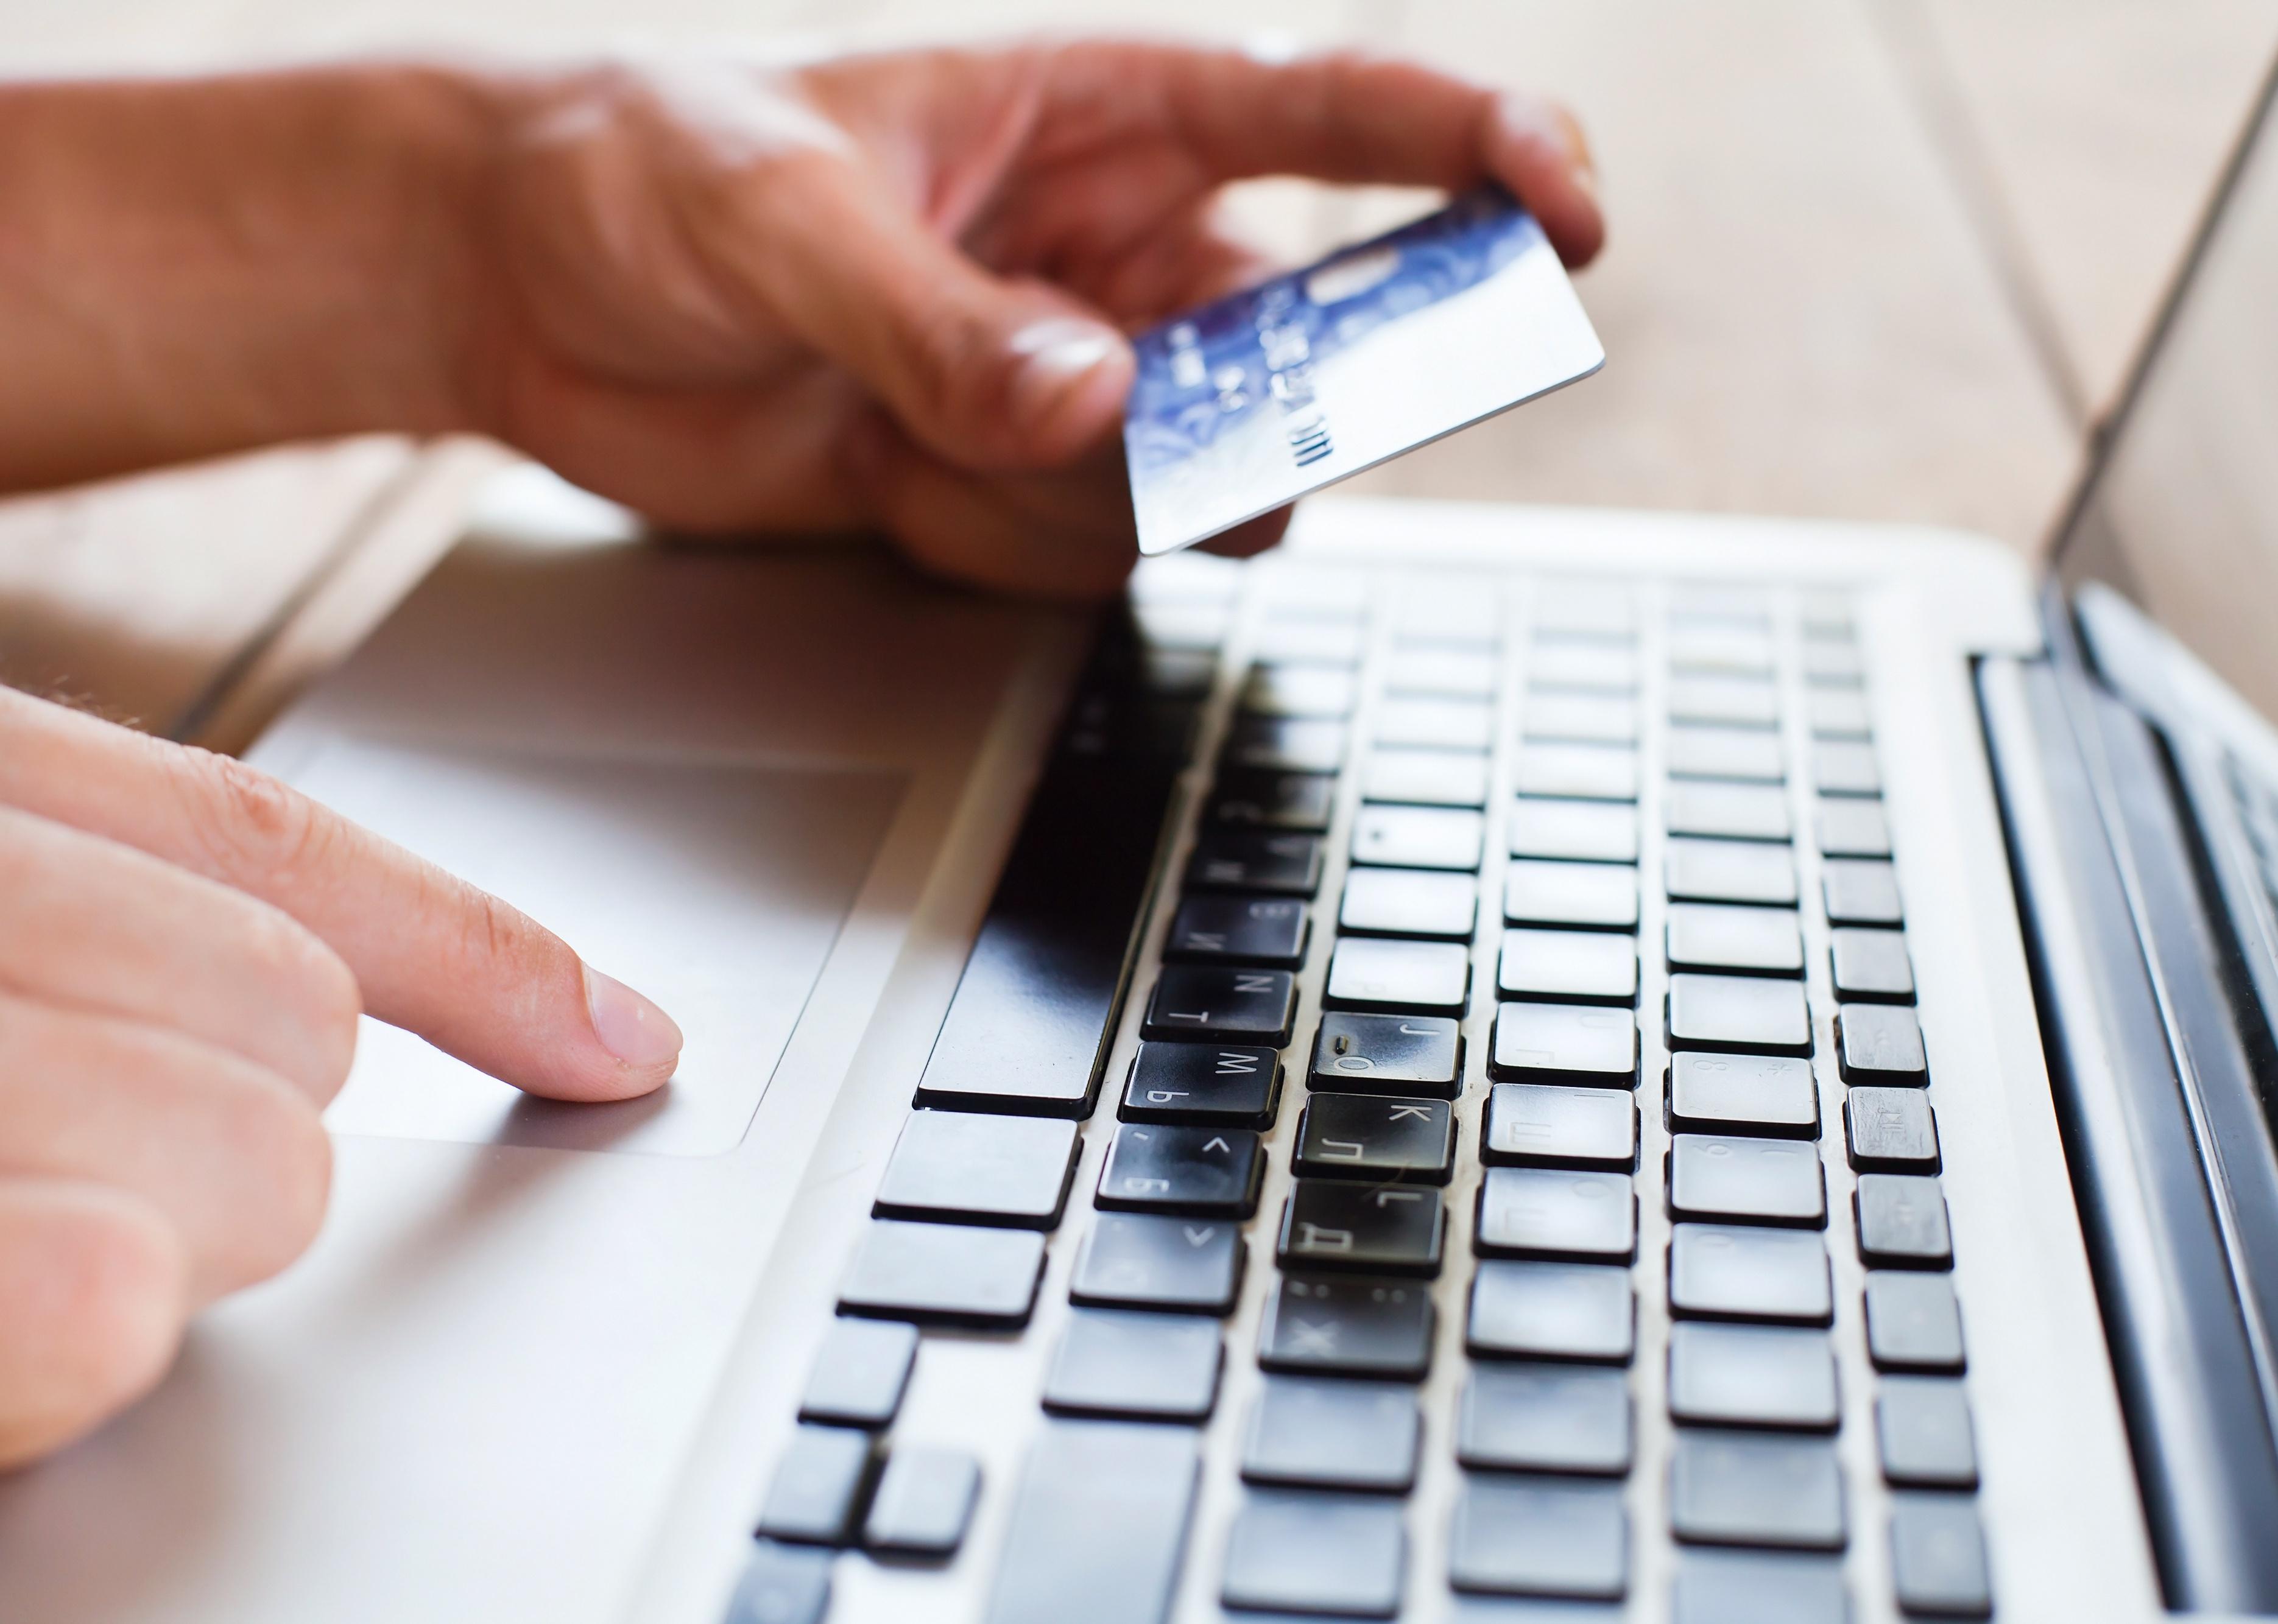 Close-up of a hand holding a credit card and typing on laptop